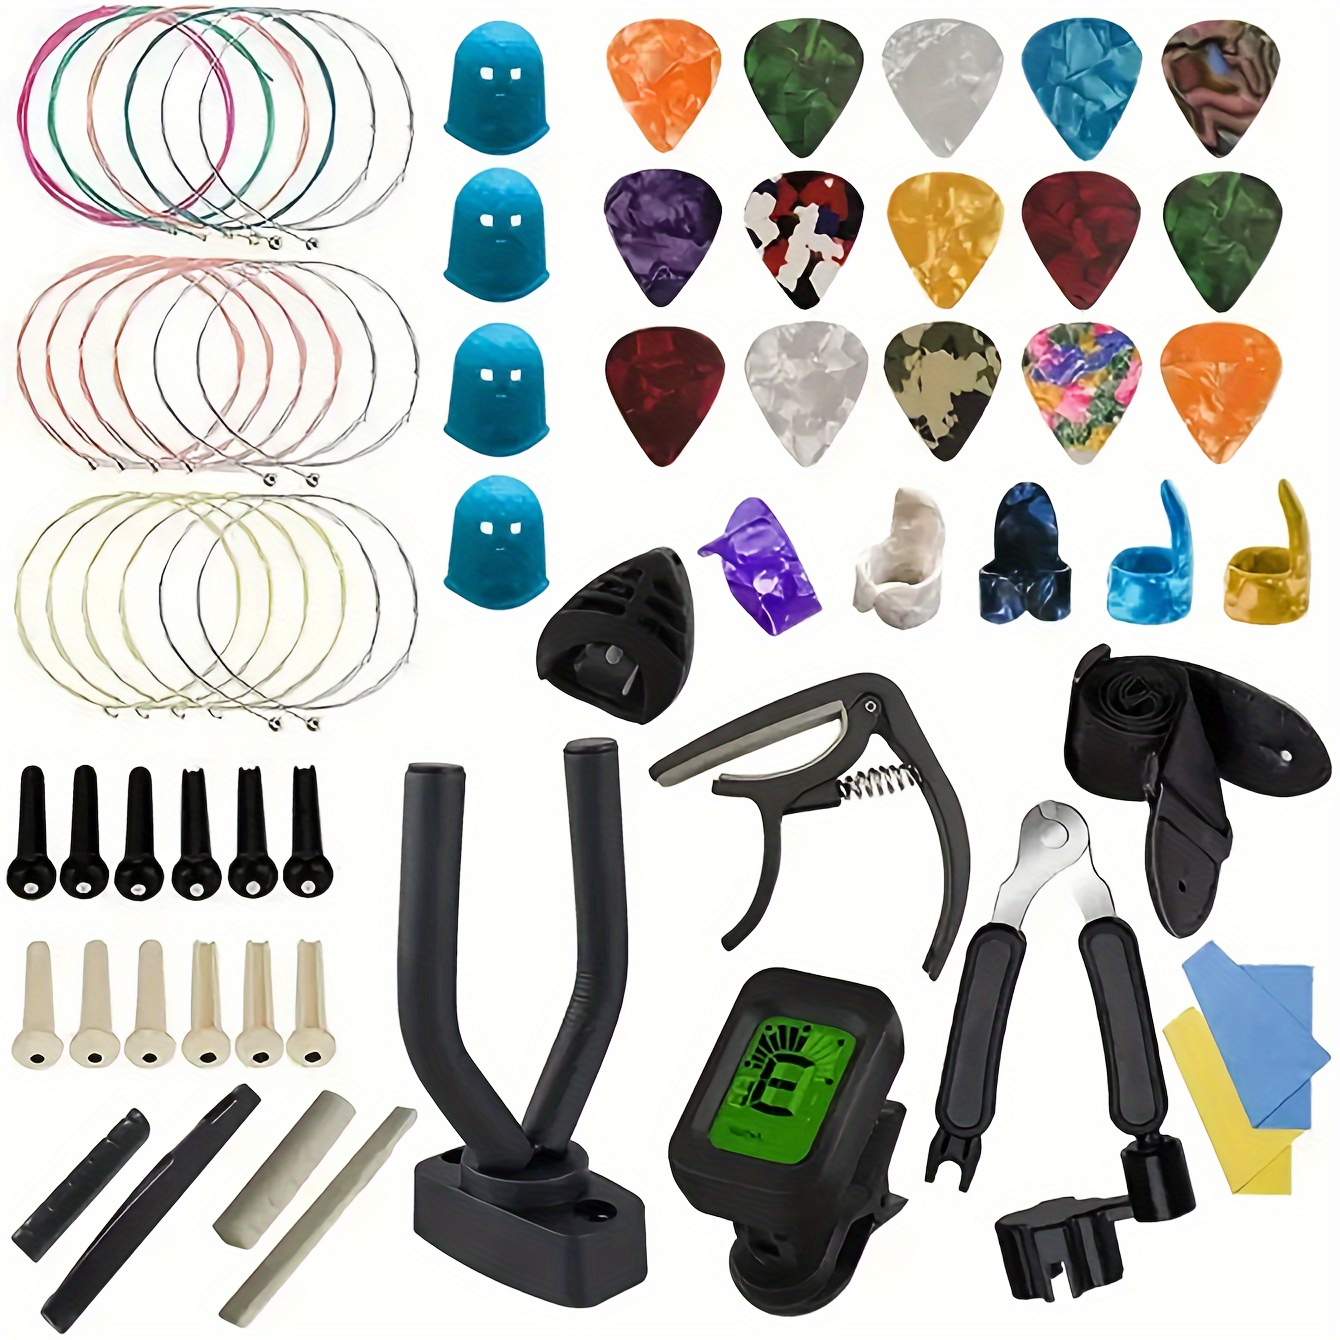 

60/65/66pcs Guitar Accessories Kit, Acoustic Guitar Changing Tool, Including Acoustic Strings, Guitar Picks, Capo, String Winder&cutter, Tuner, Guitar Bones, For Guitar Players And Guitar Beginners